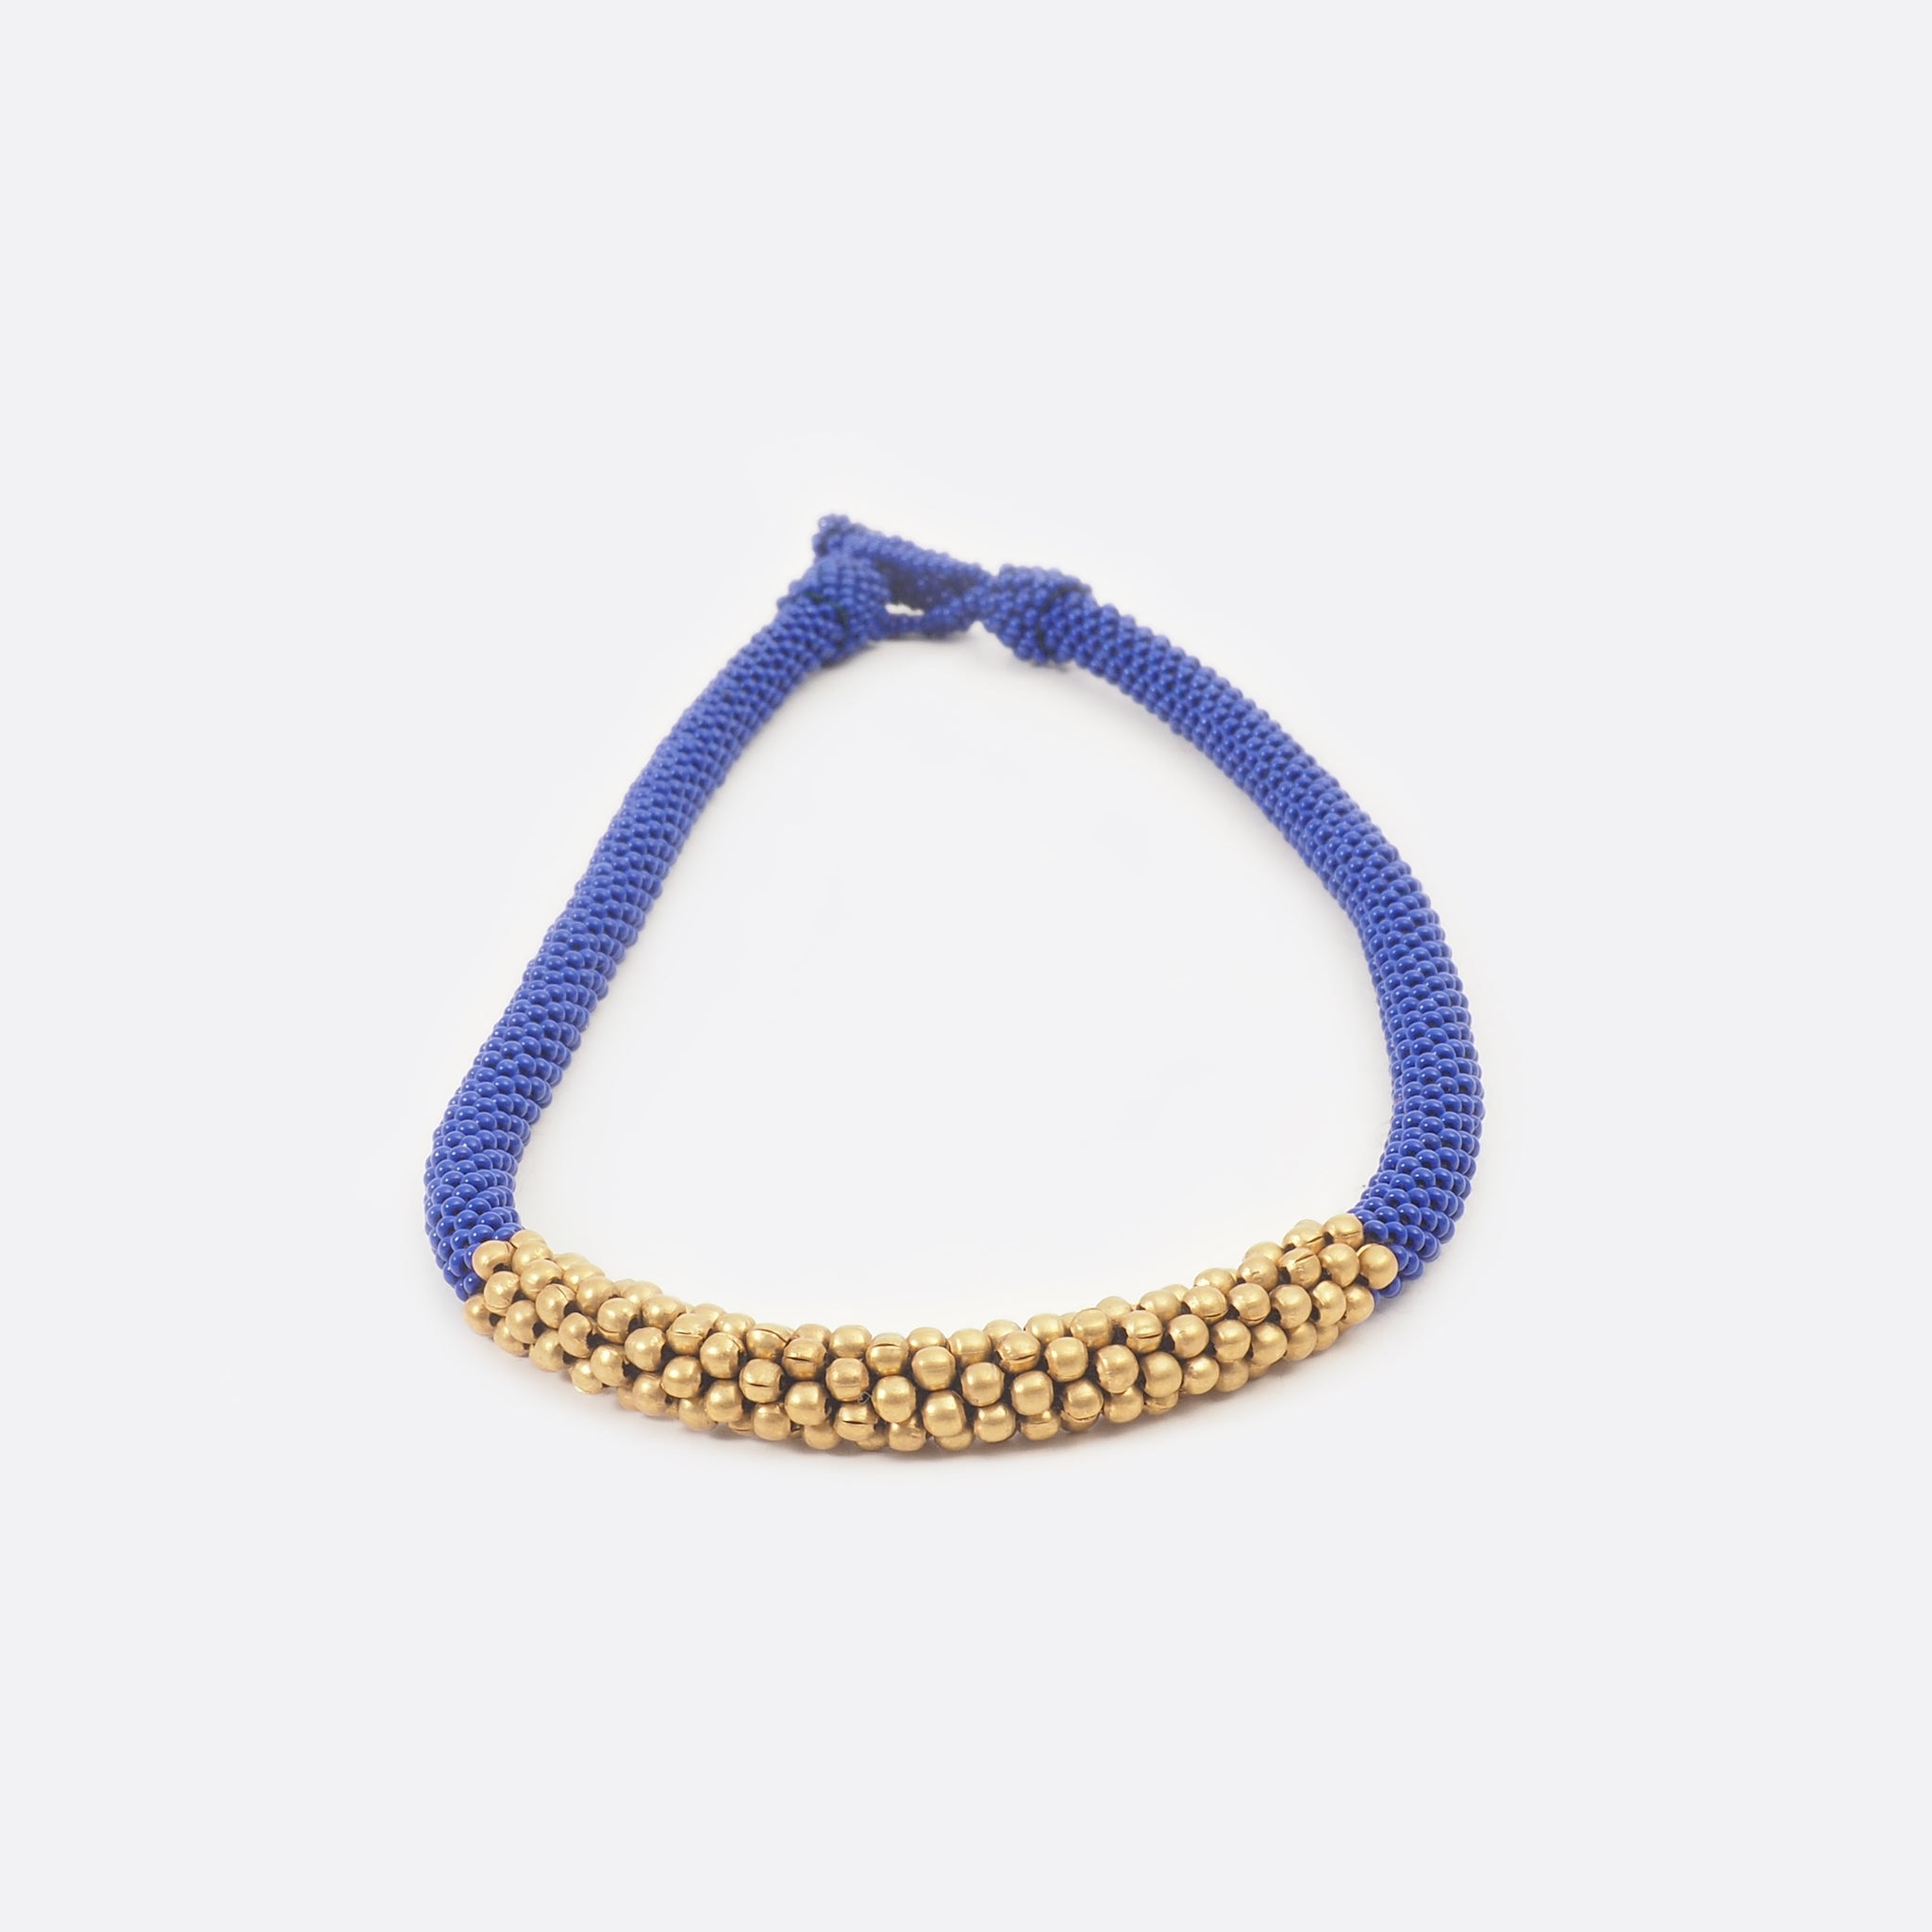 Front view of the handmade Battiayo beaded necklace. It is a single-string necklace. The necklace is mainly blue. The middle part of the necklace is done with golden brass beads. The part of the brass beads is around 7cm long. 